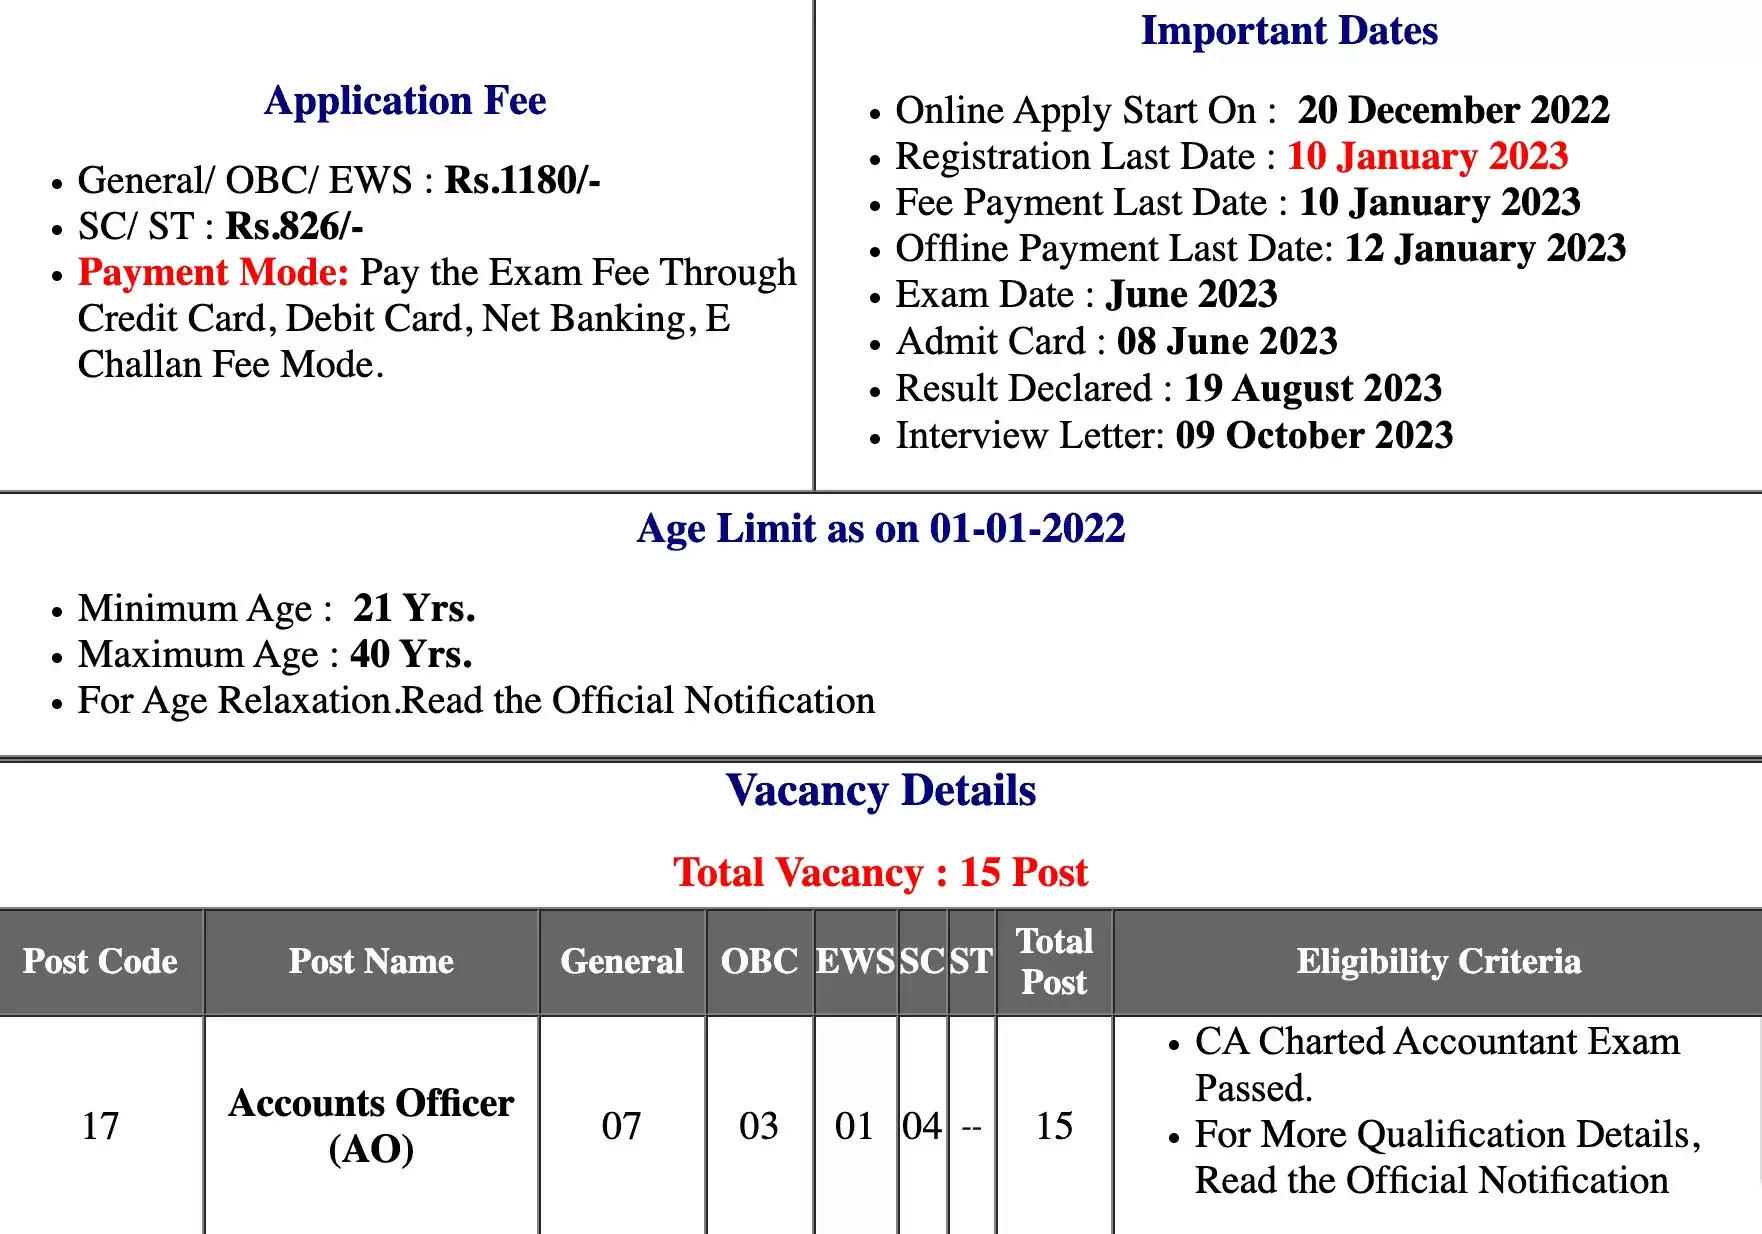 UPPCL Accounts Officer AO Recruitment 2022: Interview Admit Card Out